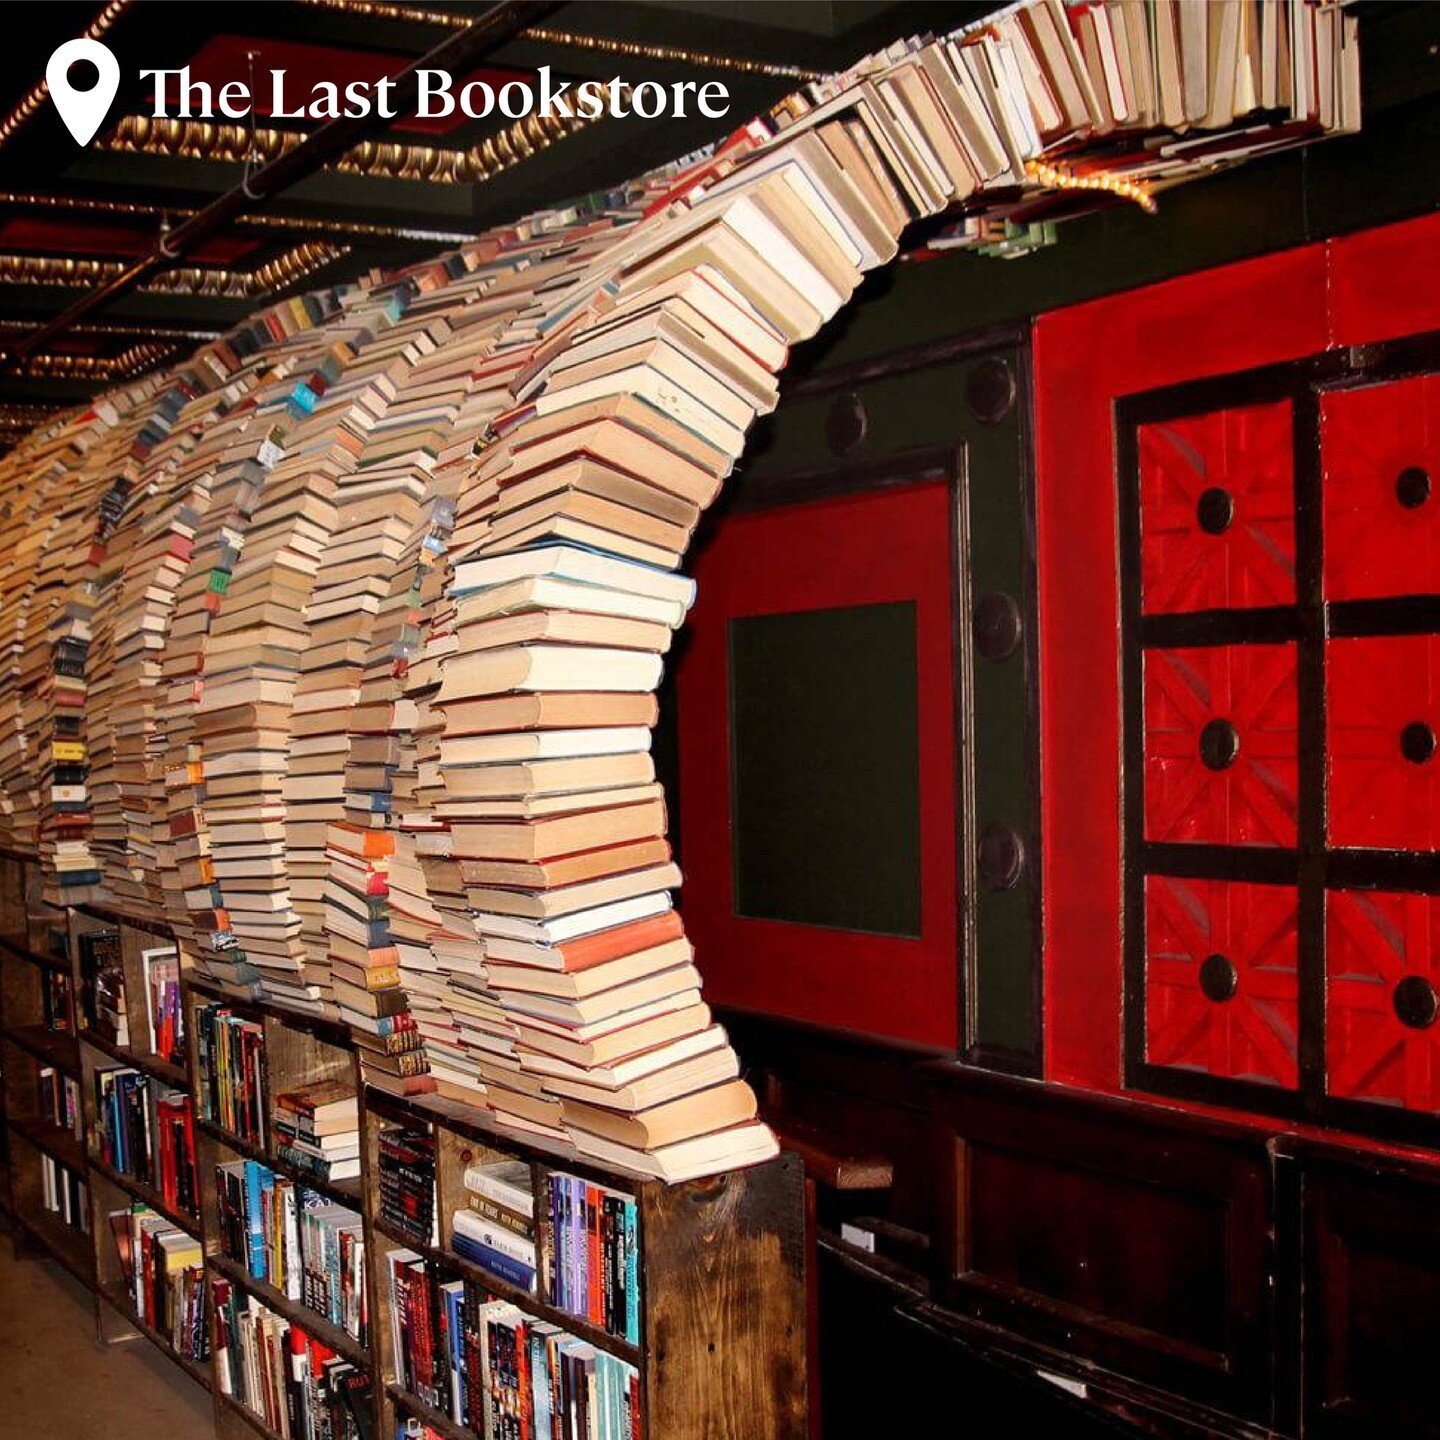 Step inside another world at The Last Bookstore in DTLA (and find your next beach read)! 🏝⁠
⁠
#eddycoliving #thingstodoinla #books